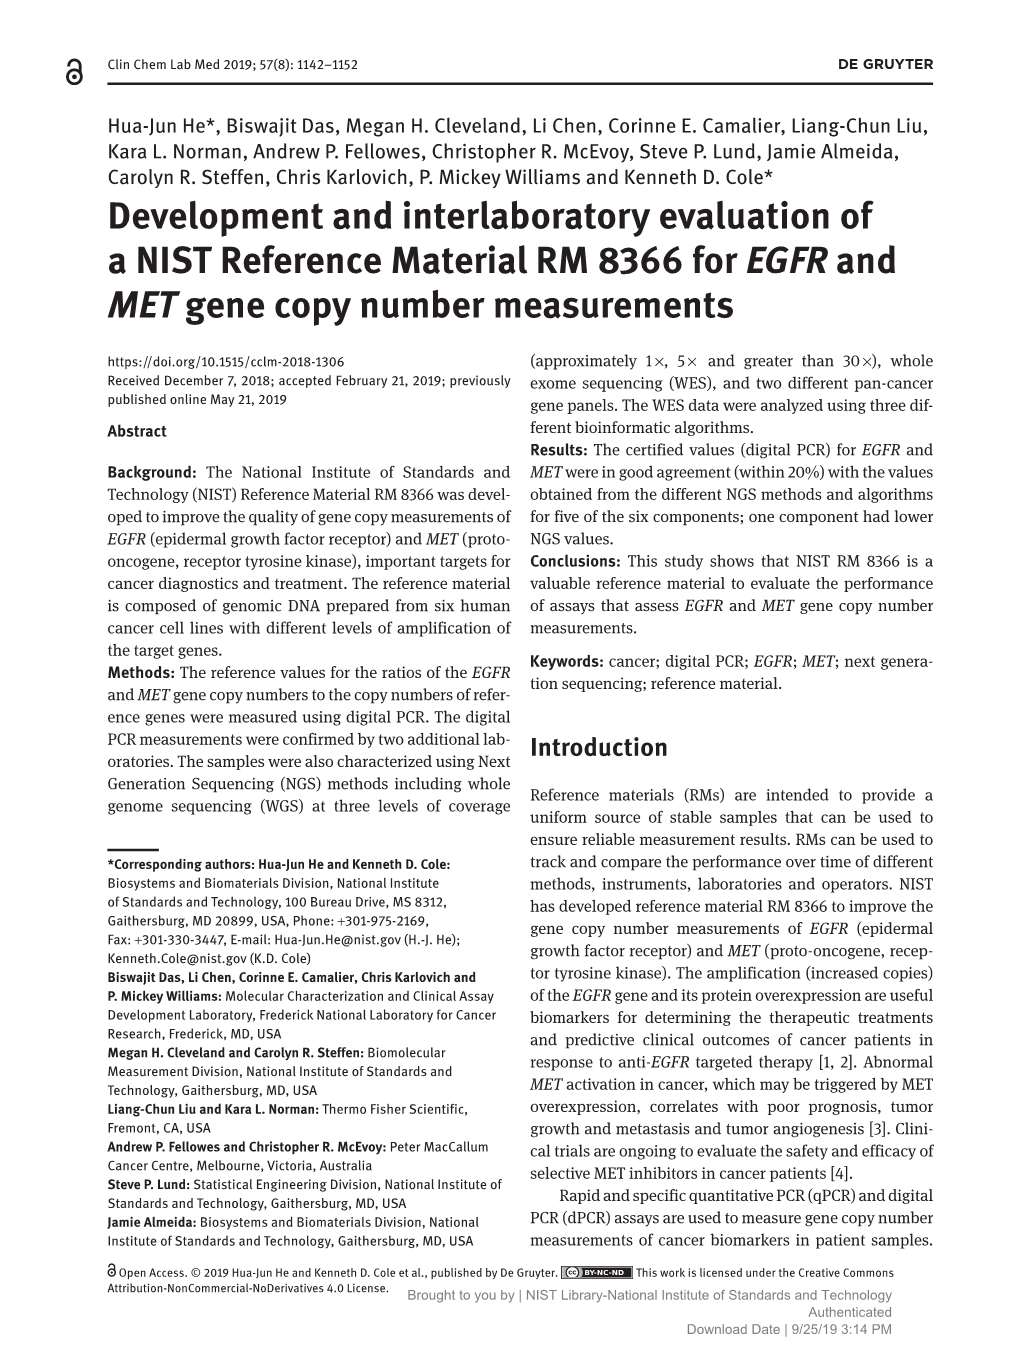 Development and Interlaboratory Evaluation of a NIST Reference